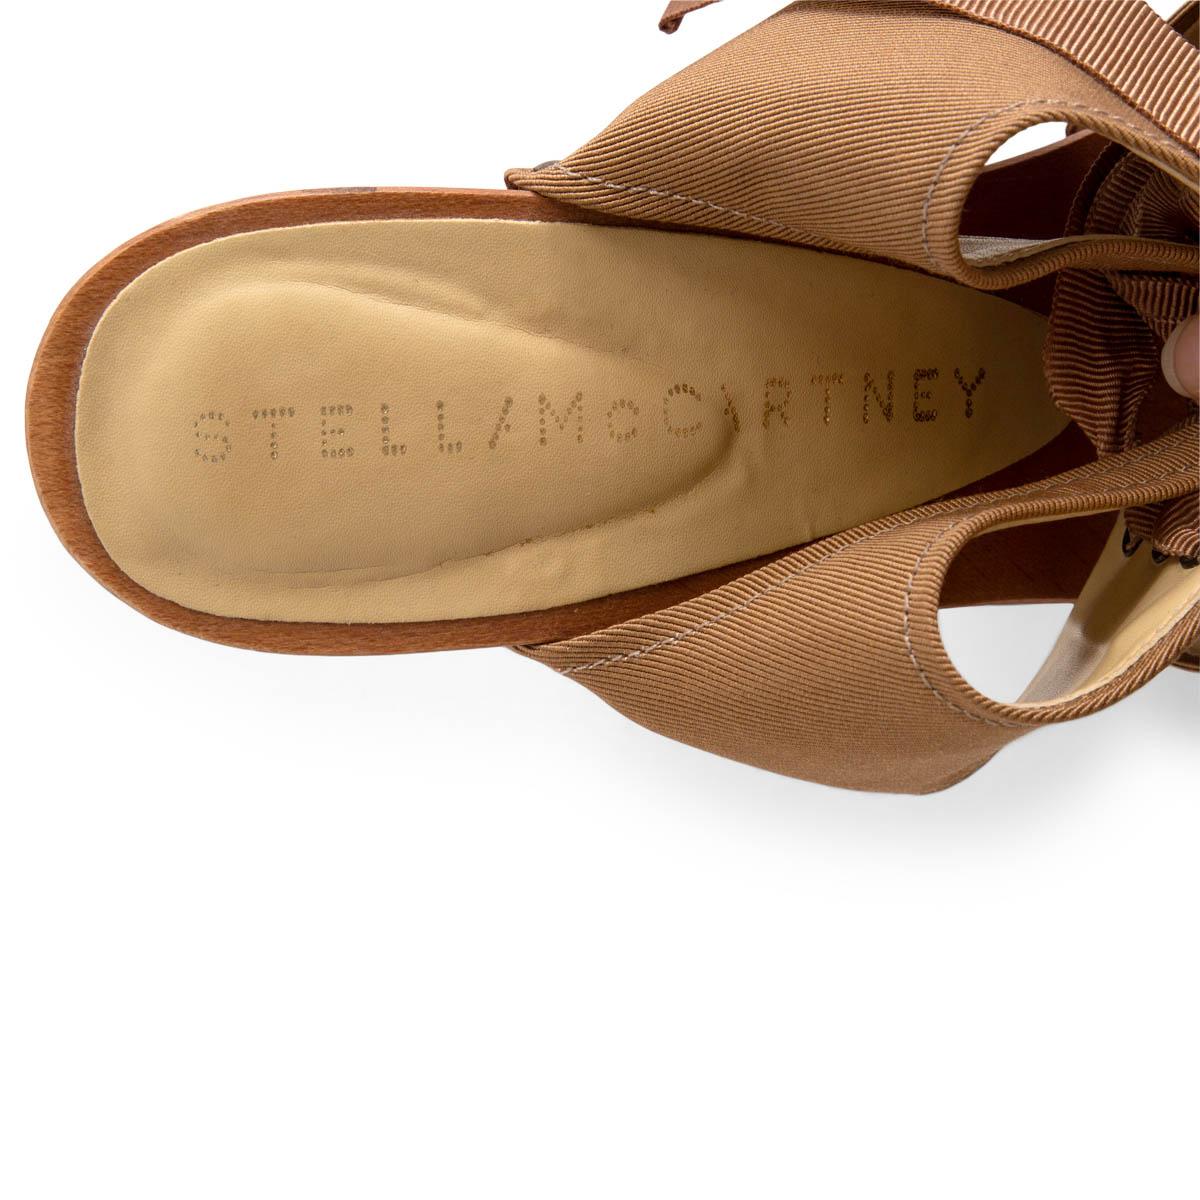 Brown STELLA MCCARTNEY brown GROSGRAIN WOODEN SOLE Sandals Shoes 37 For Sale